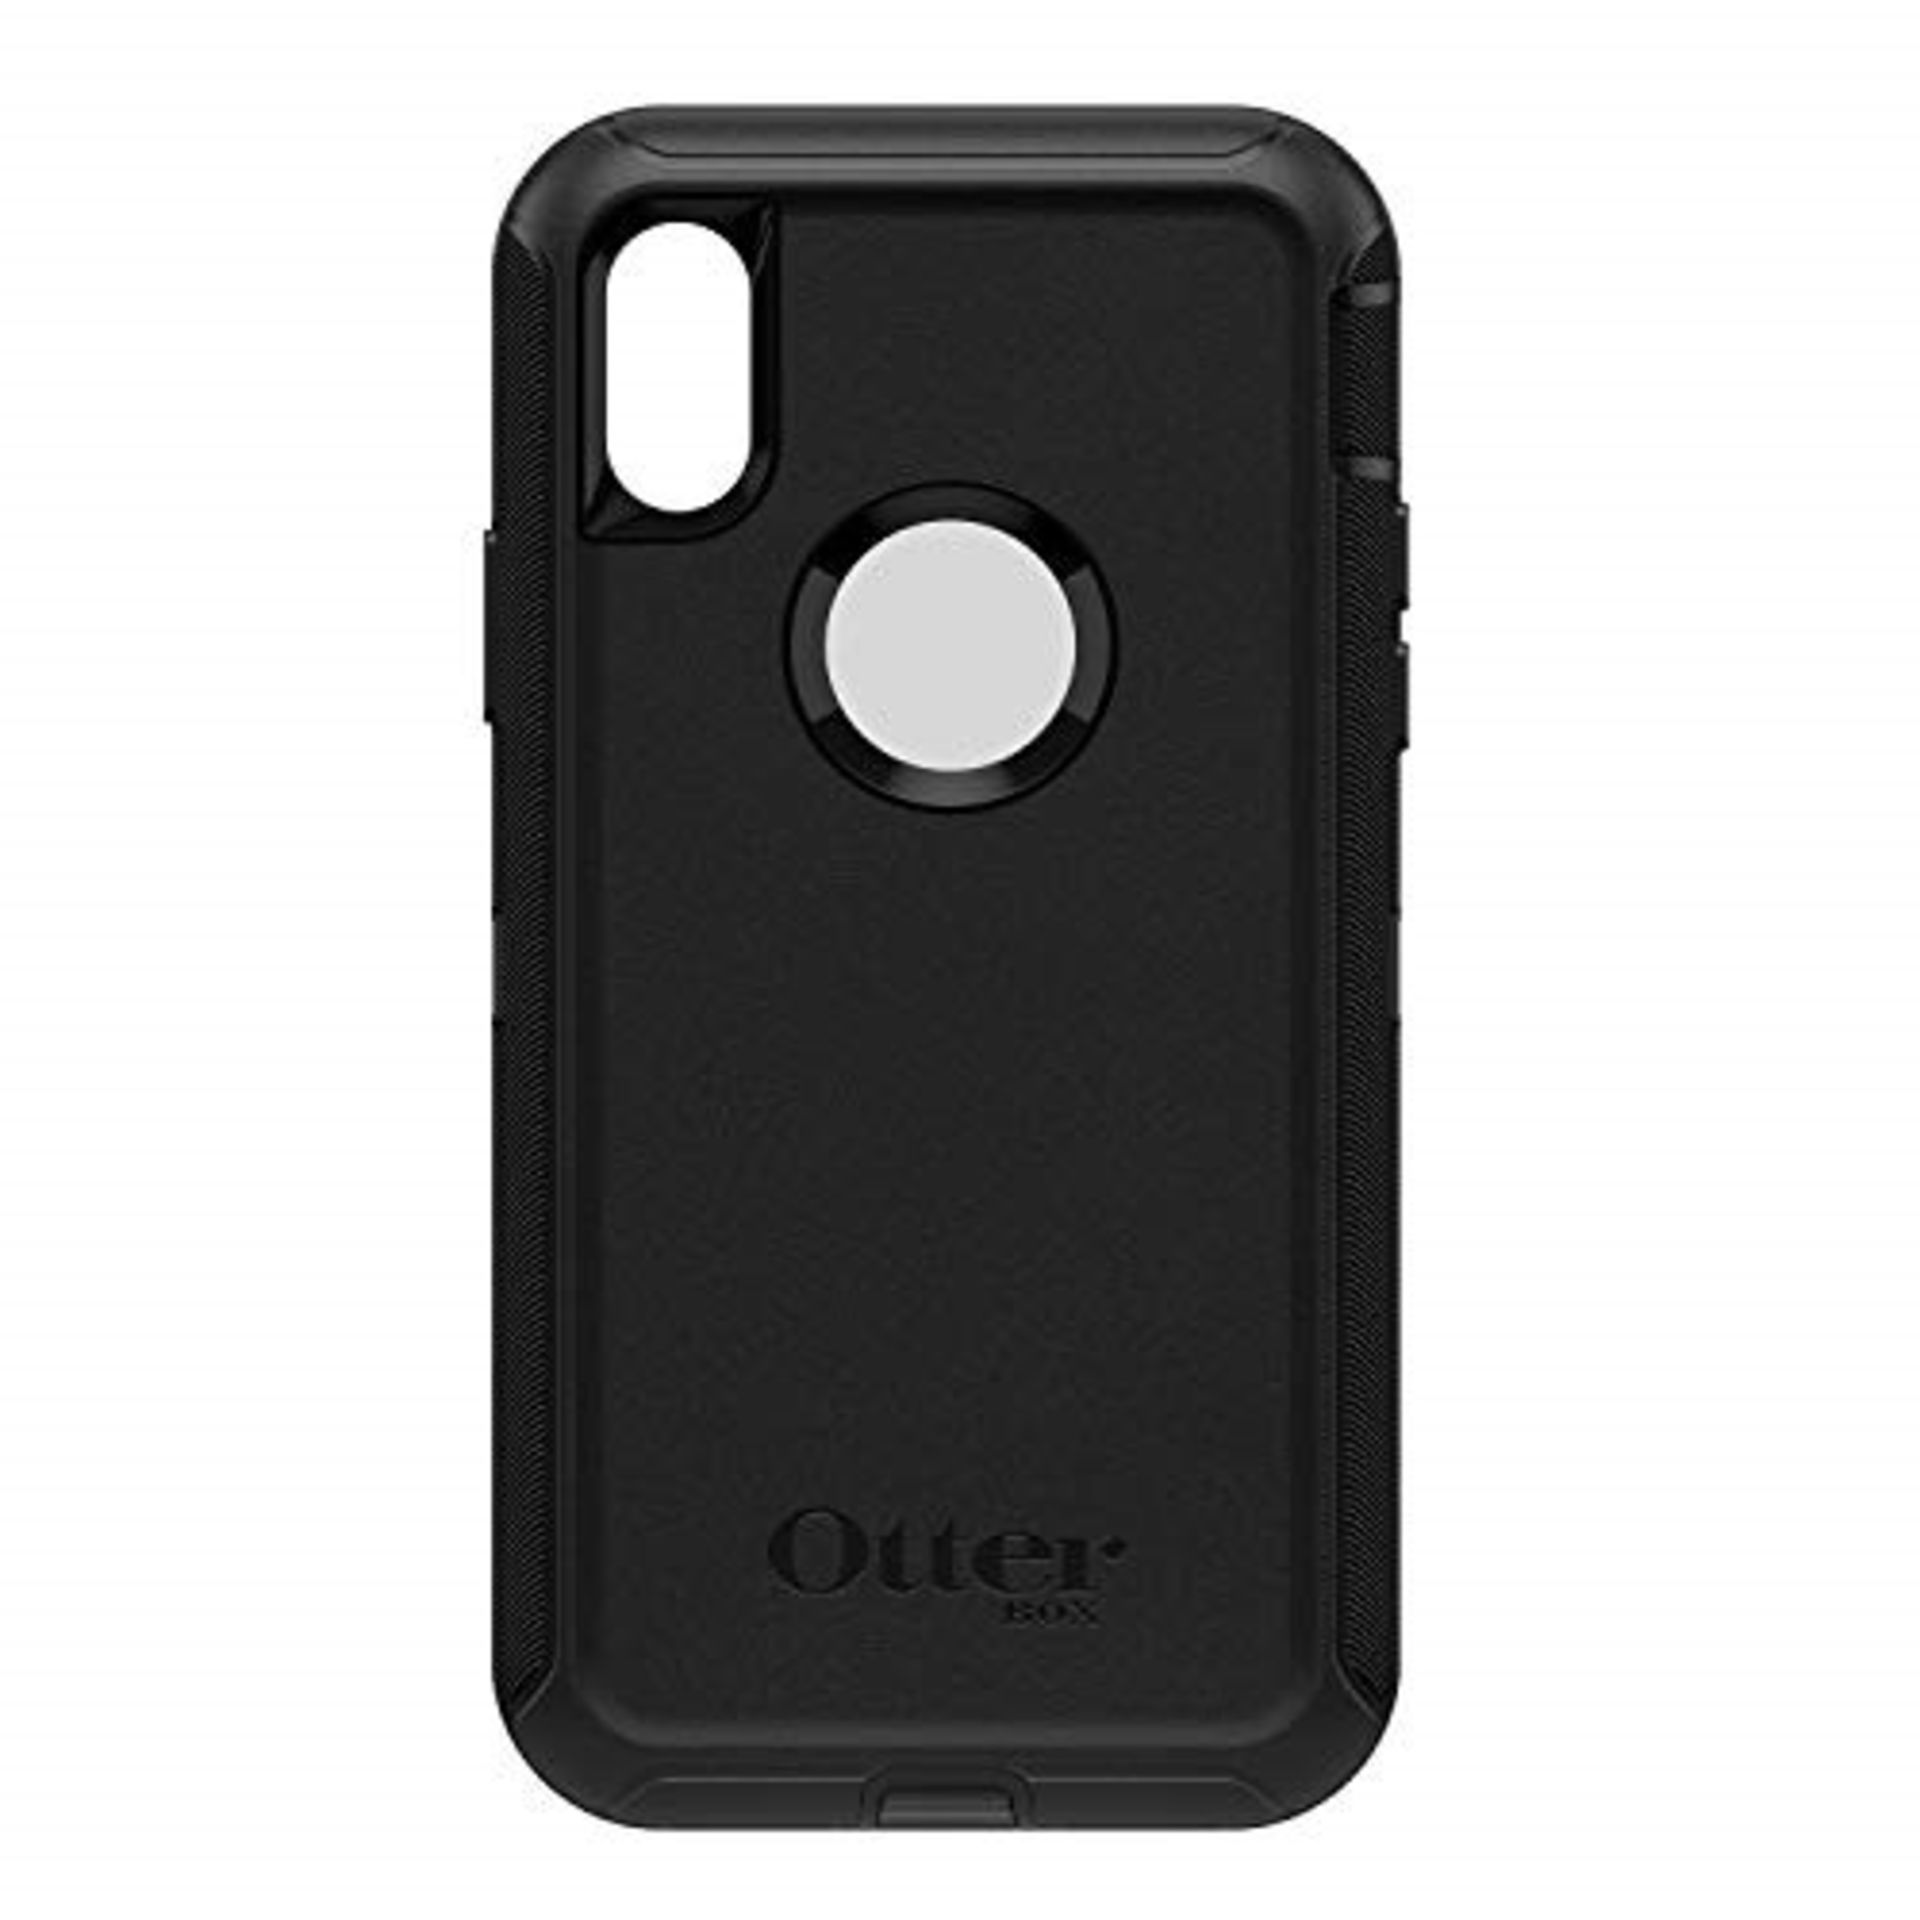 OtterBox (77-59464) DEFENDER SERIES, Rugged Protection for iPhone X/Xs - BLACK